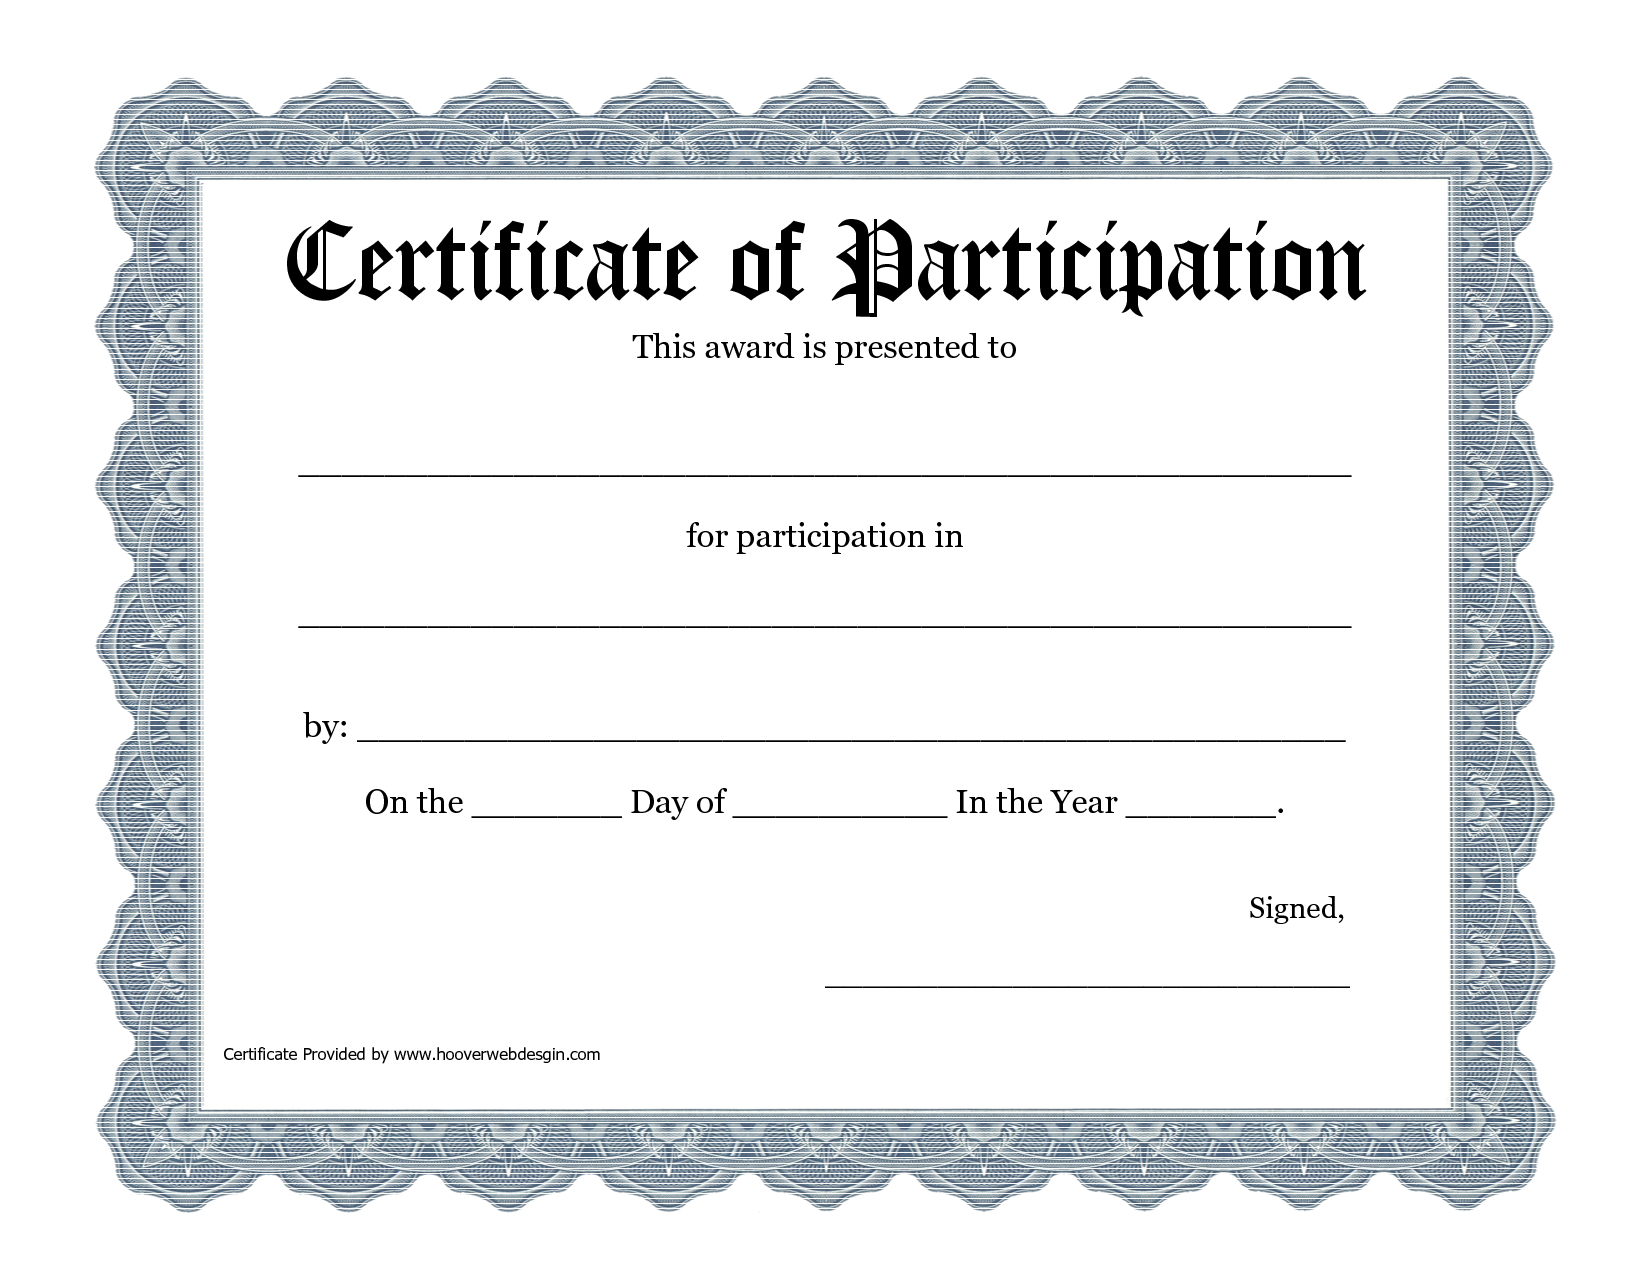 Free Printable Award Certificate Template - Bing Images | 2016 Art within Certification Of Participation Free Template